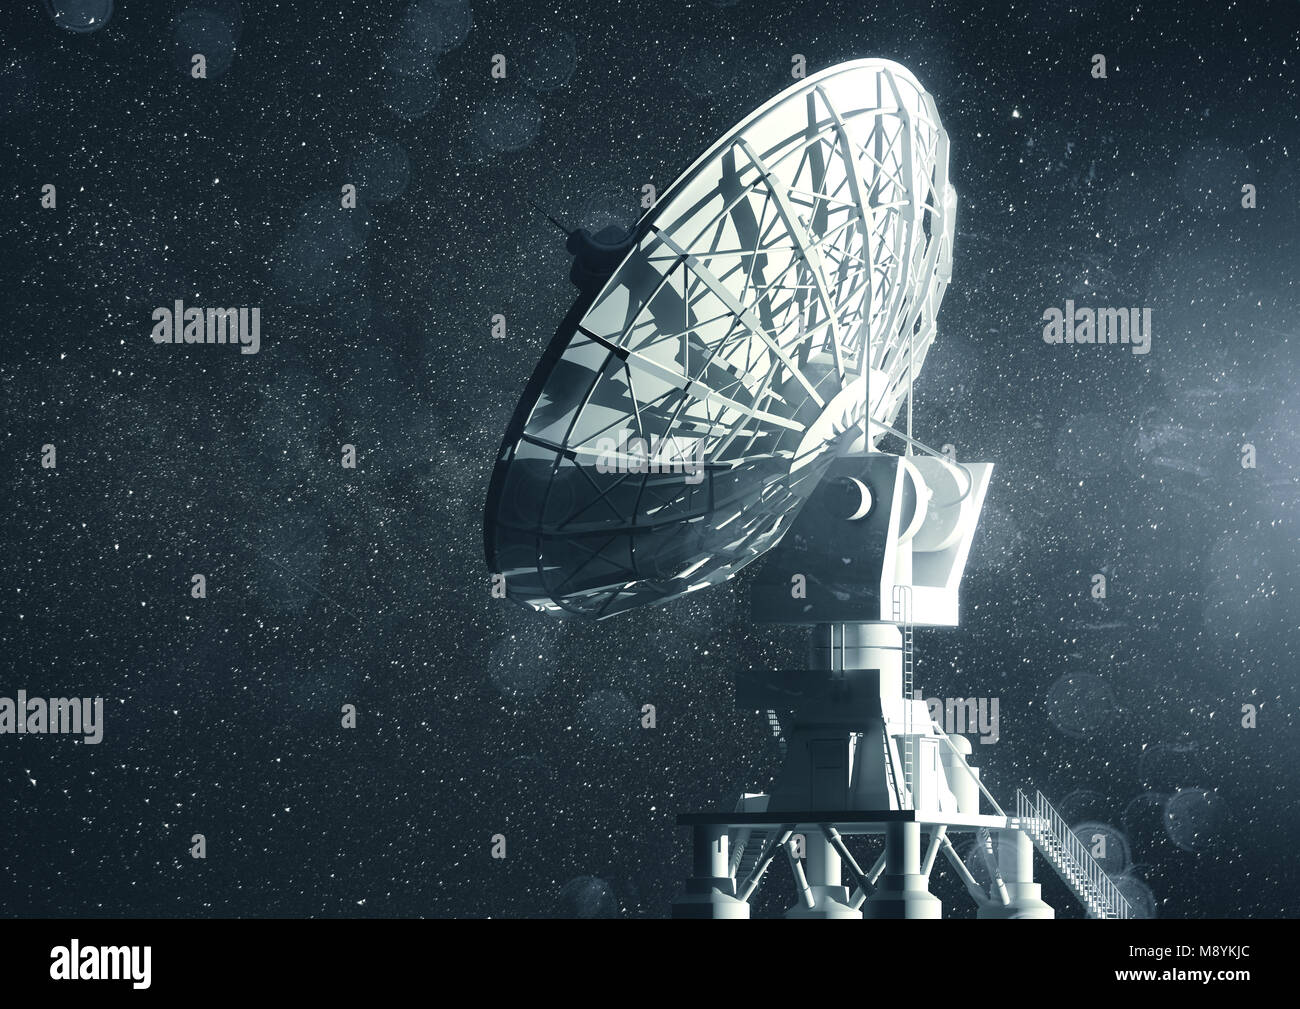 A very large radio telescope searching for information in space. 3D illustration. Stock Photo